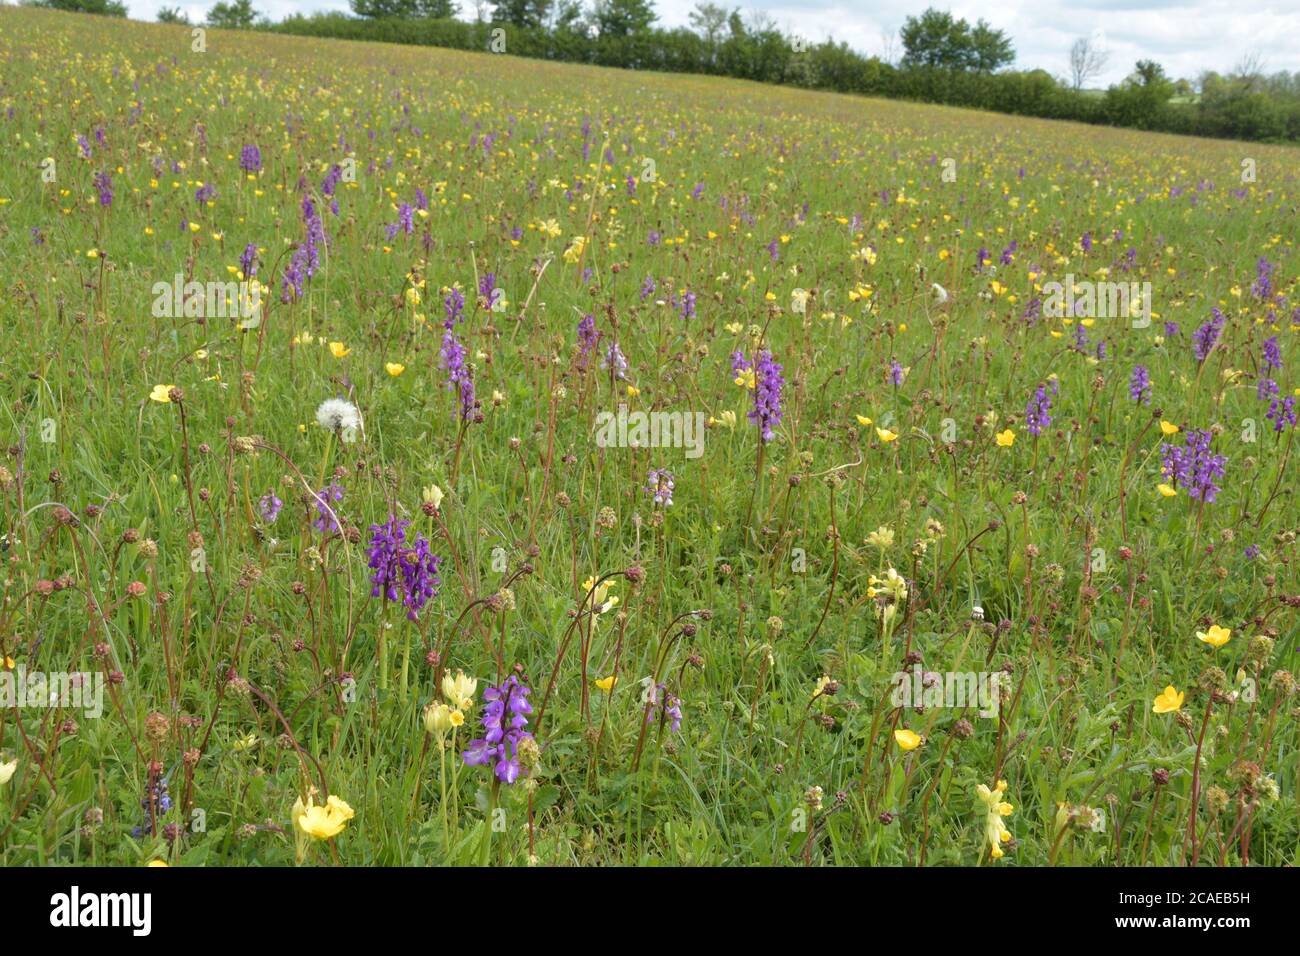 Wildflower meadow in spring with cowslips'primula varis' and green-winged orchids'orchis morio' in good numbers.This meadow in Somerset being a rare s Stock Photo